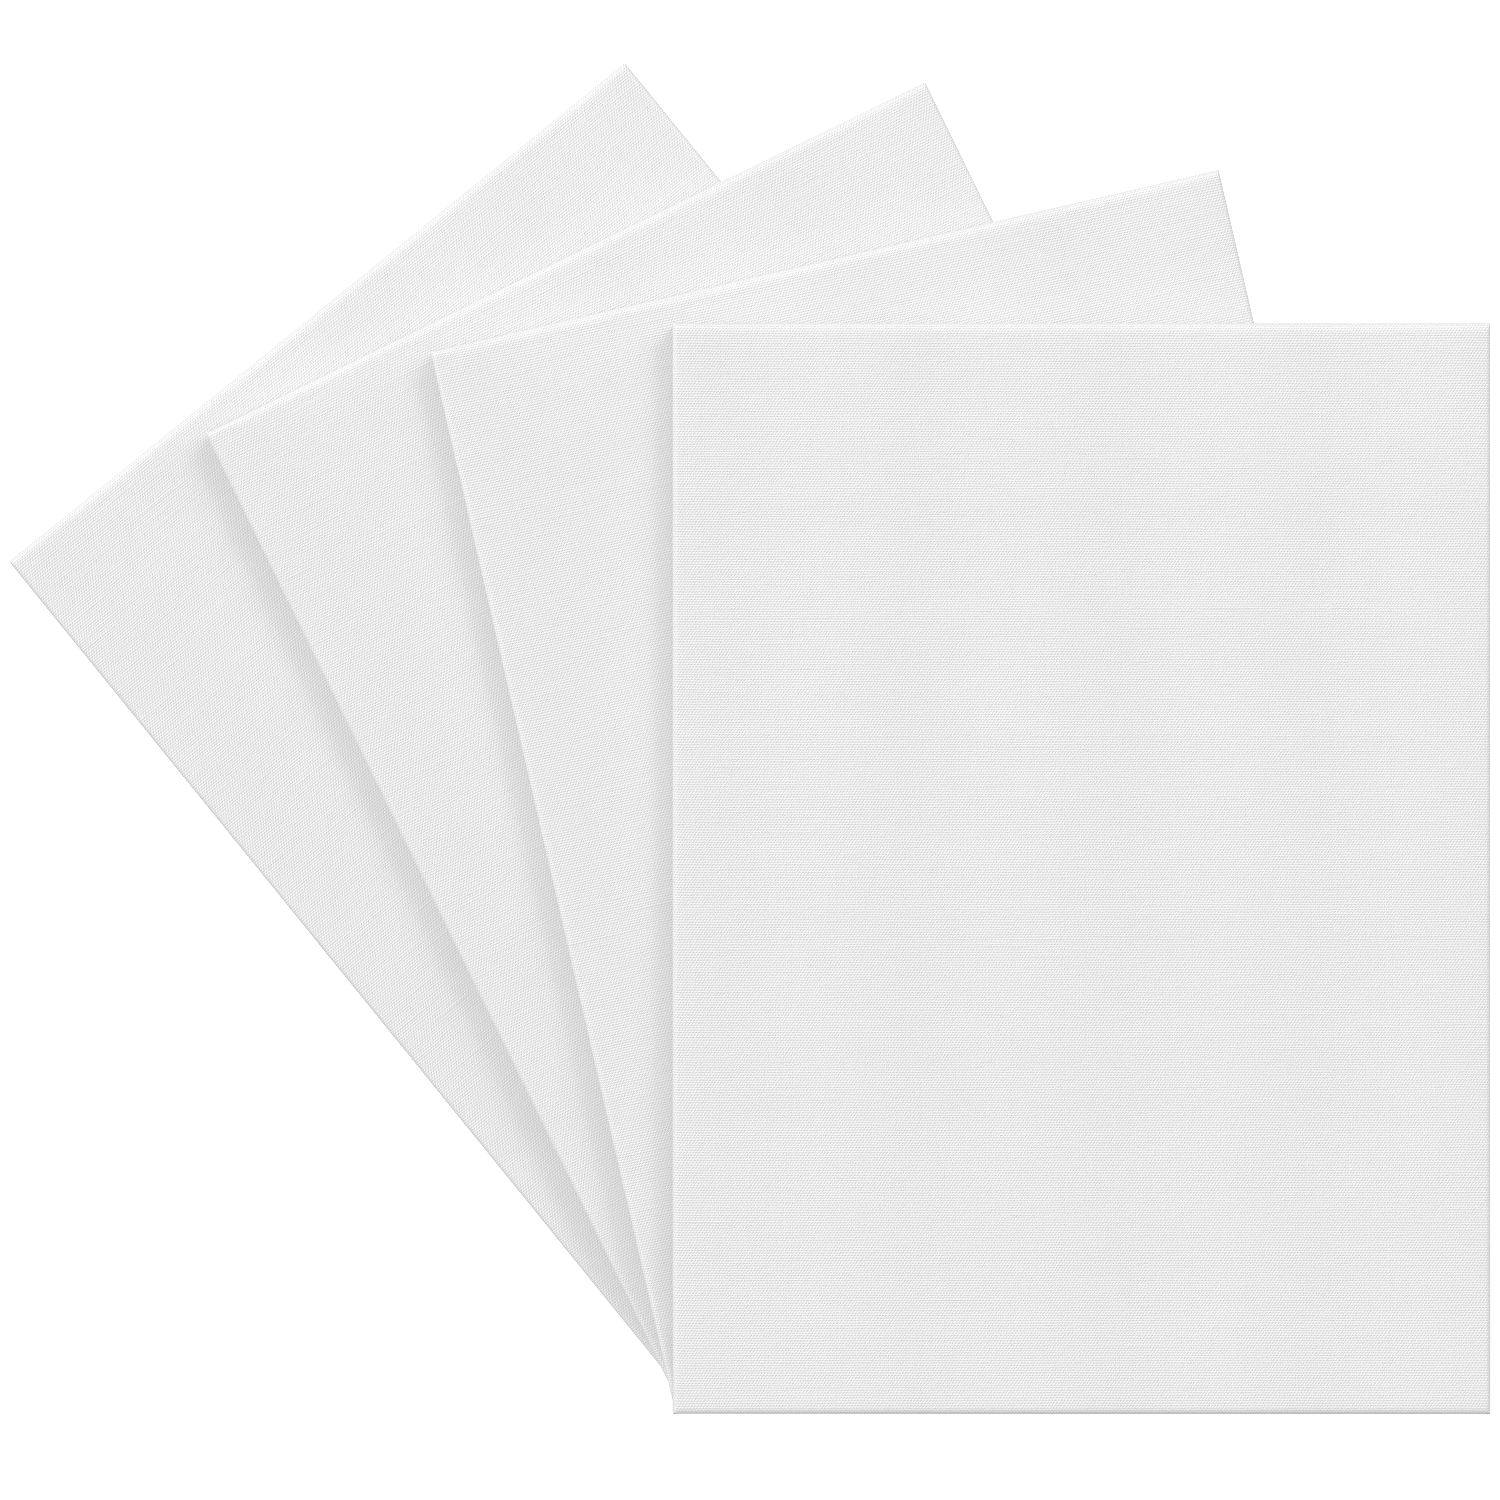 Premium Stretched Canvas, 18 x 24 - Pack of 4